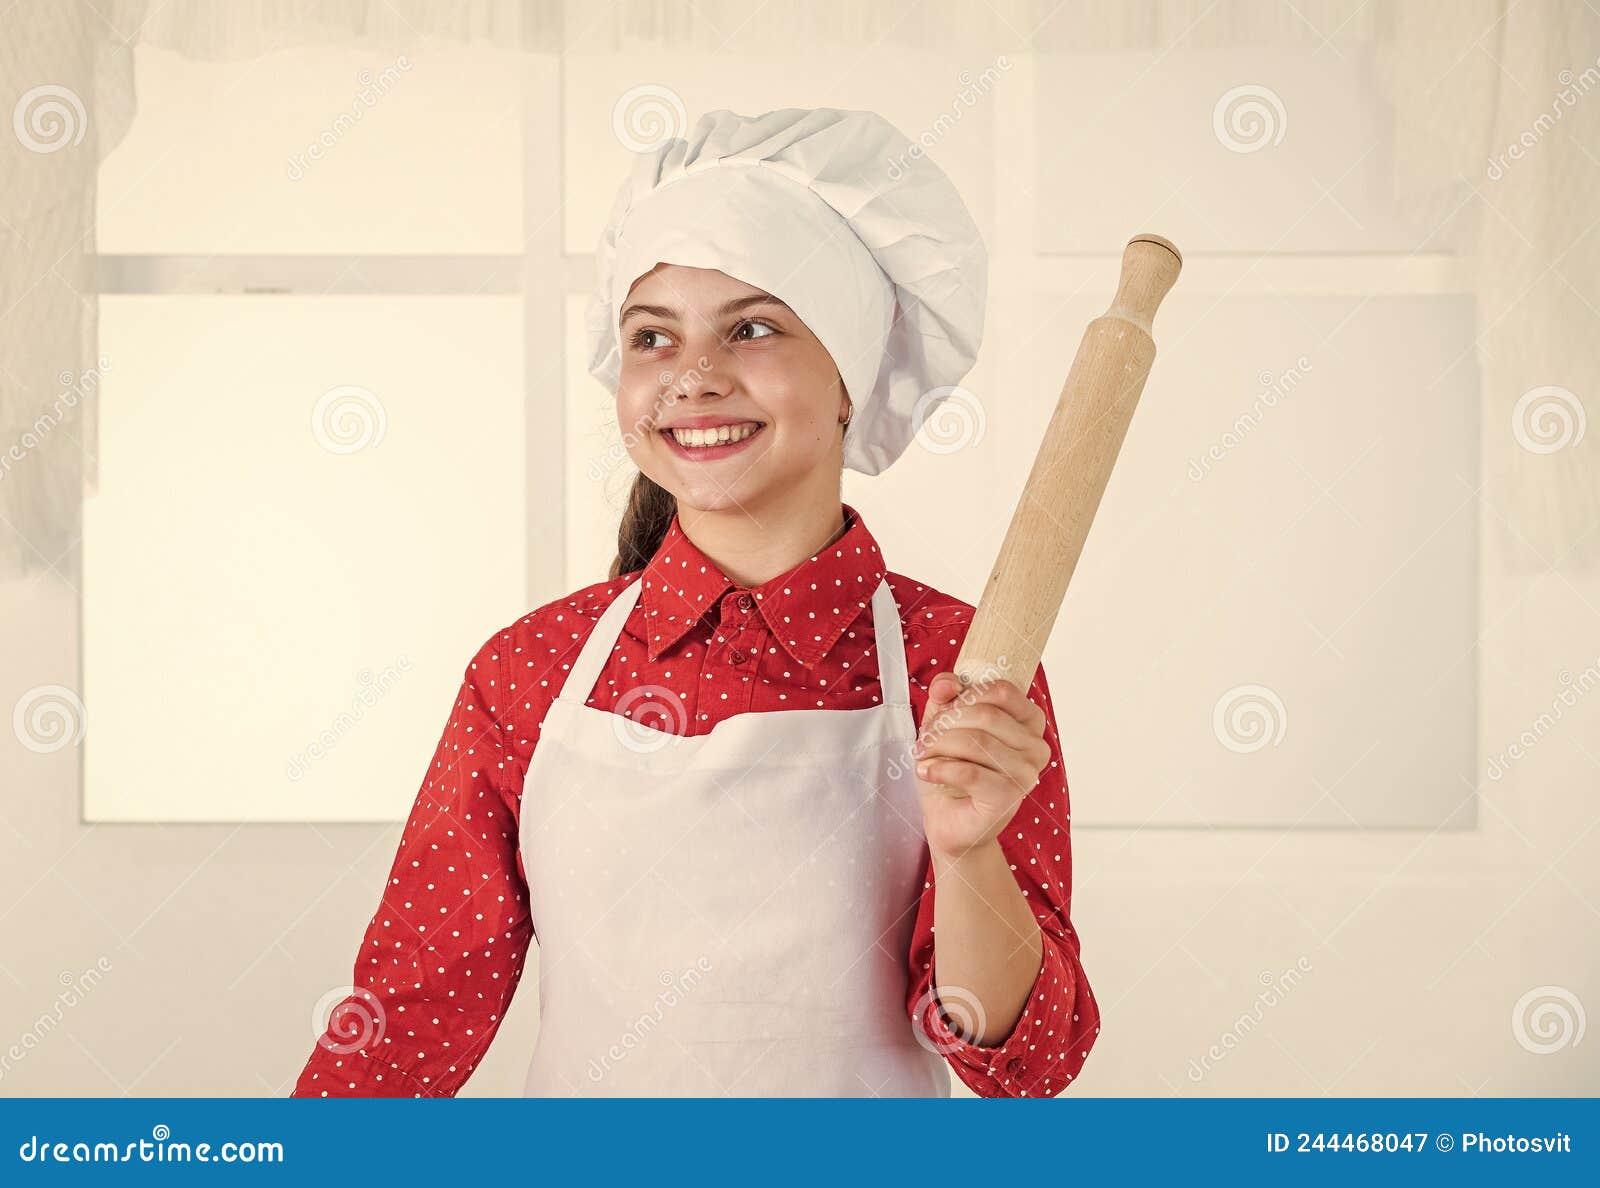 Smiling Kids In Cook's Uniform Making Bakery Dough With Flour And Eggs In  The Kitchen Stock Photo, Picture and Royalty Free Image. Image 60681329.